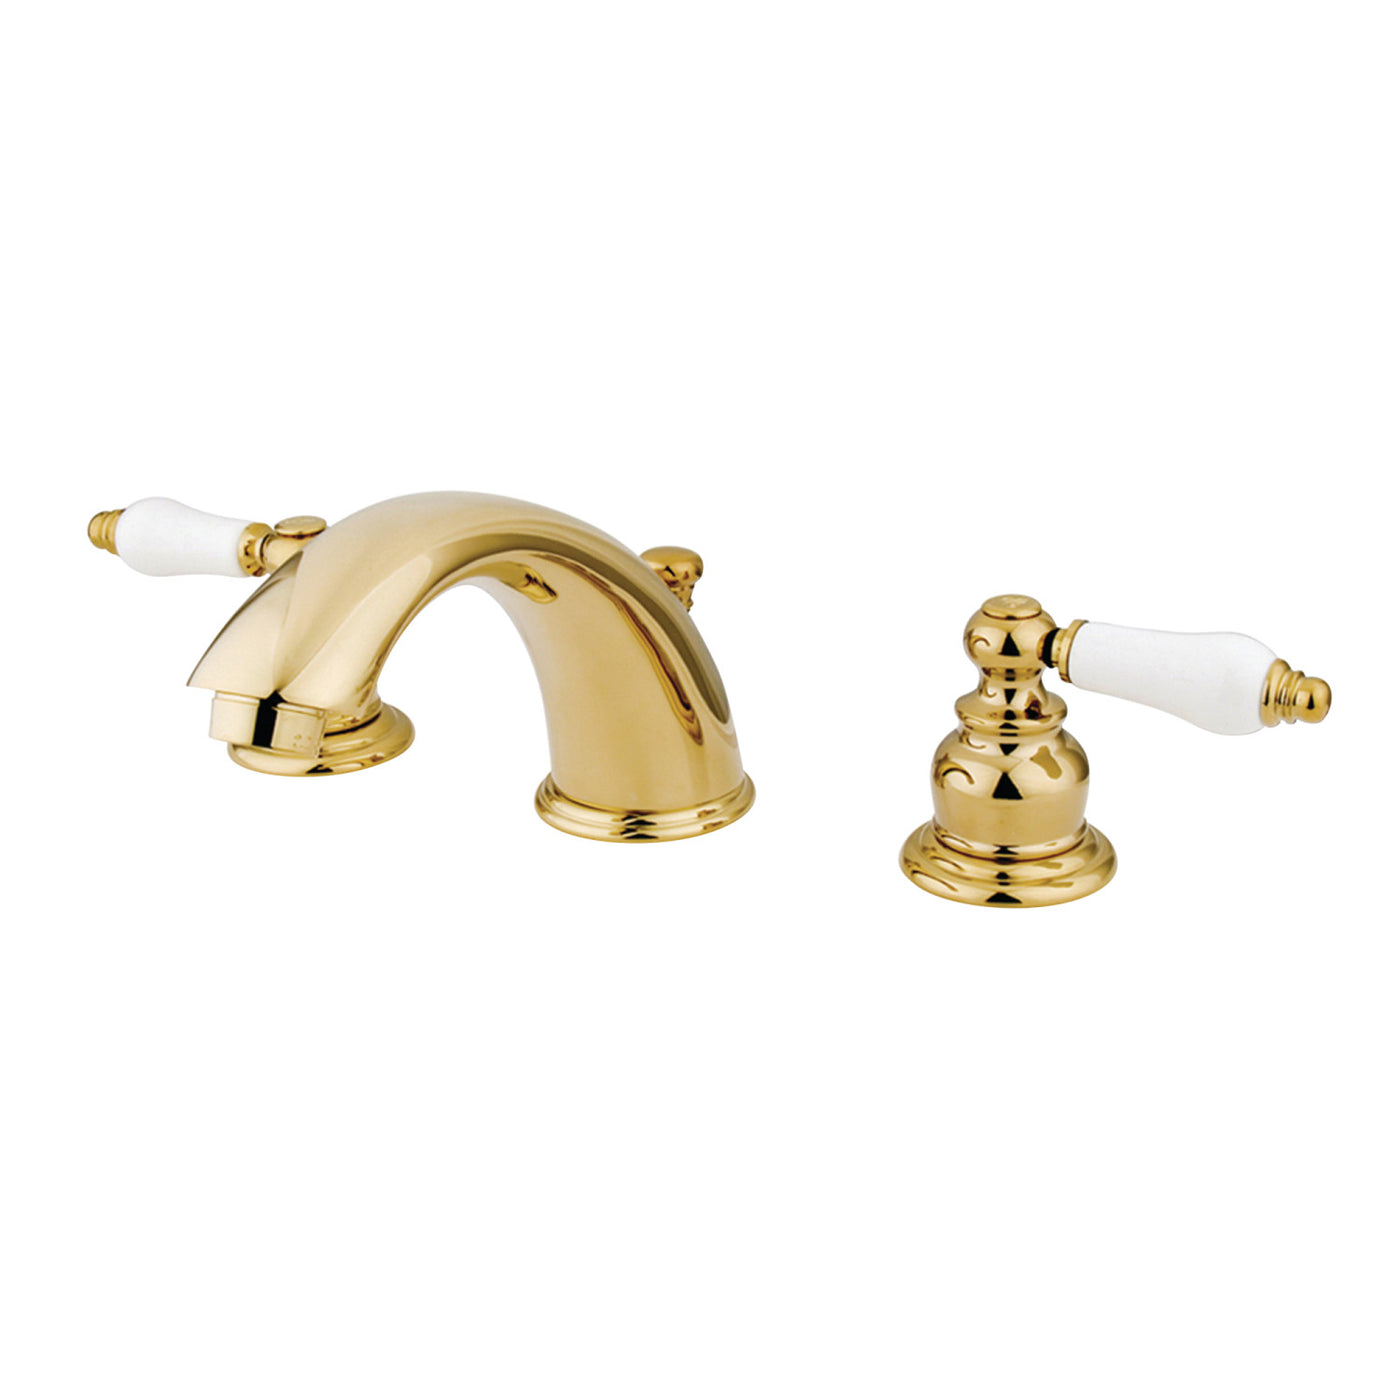 Elements of Design EB972B Widespread Bathroom Faucet with Retail Pop-Up, Polished Brass